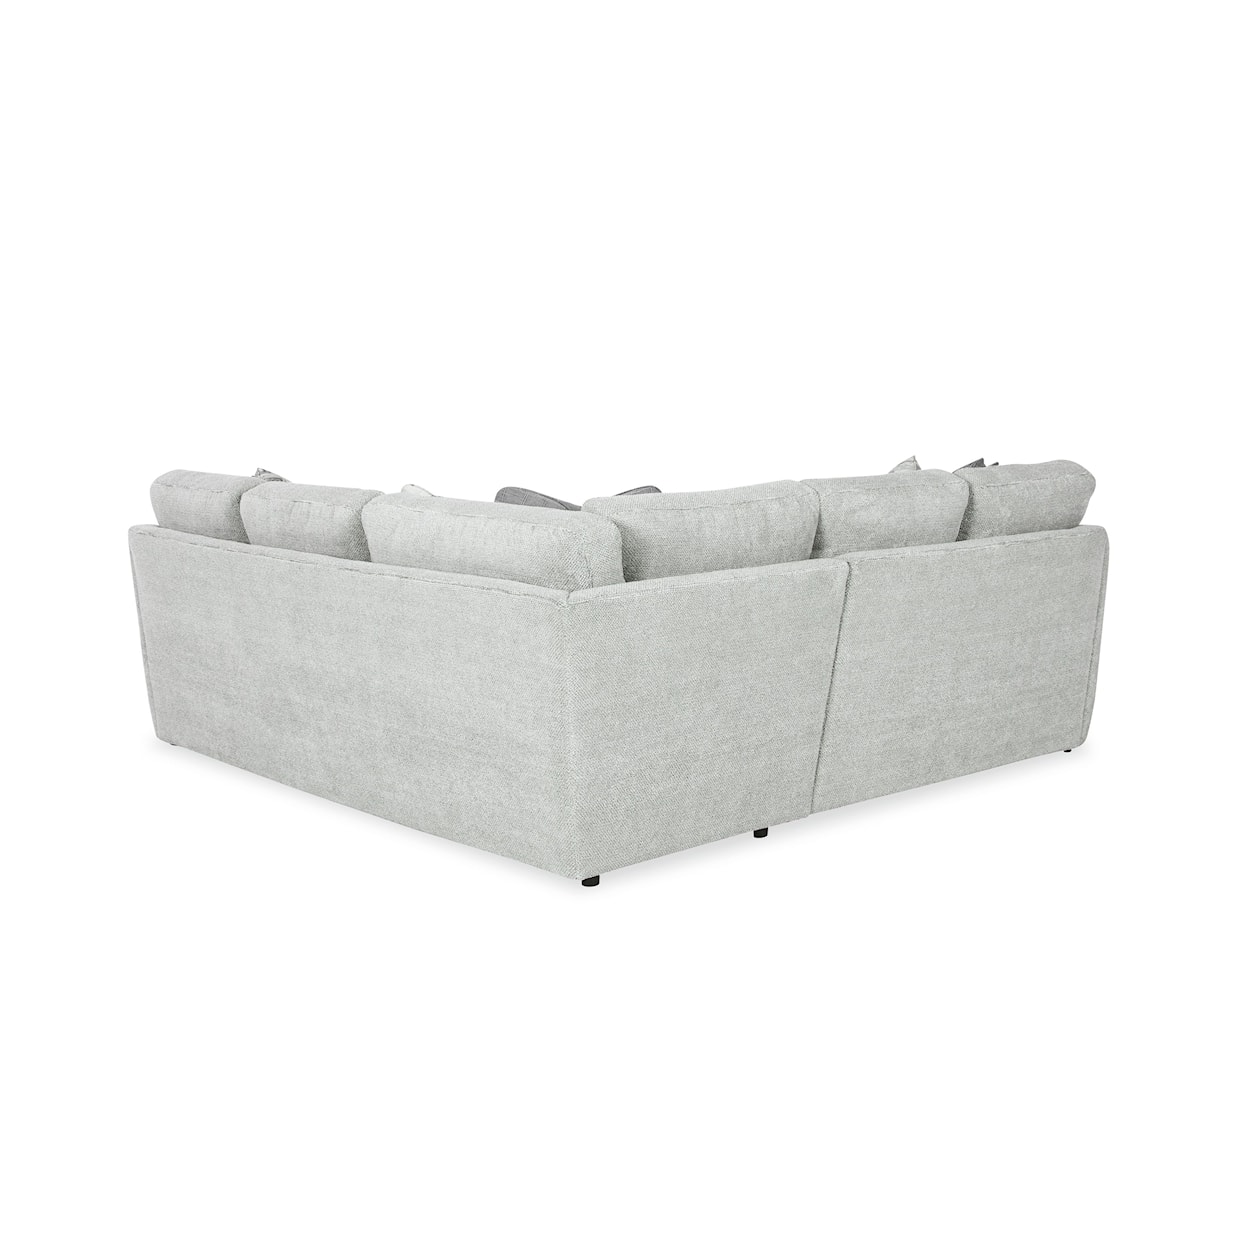 Hickory Craft 716850BD 4-Seat Sectional Sofa w/ RAF Loveseat